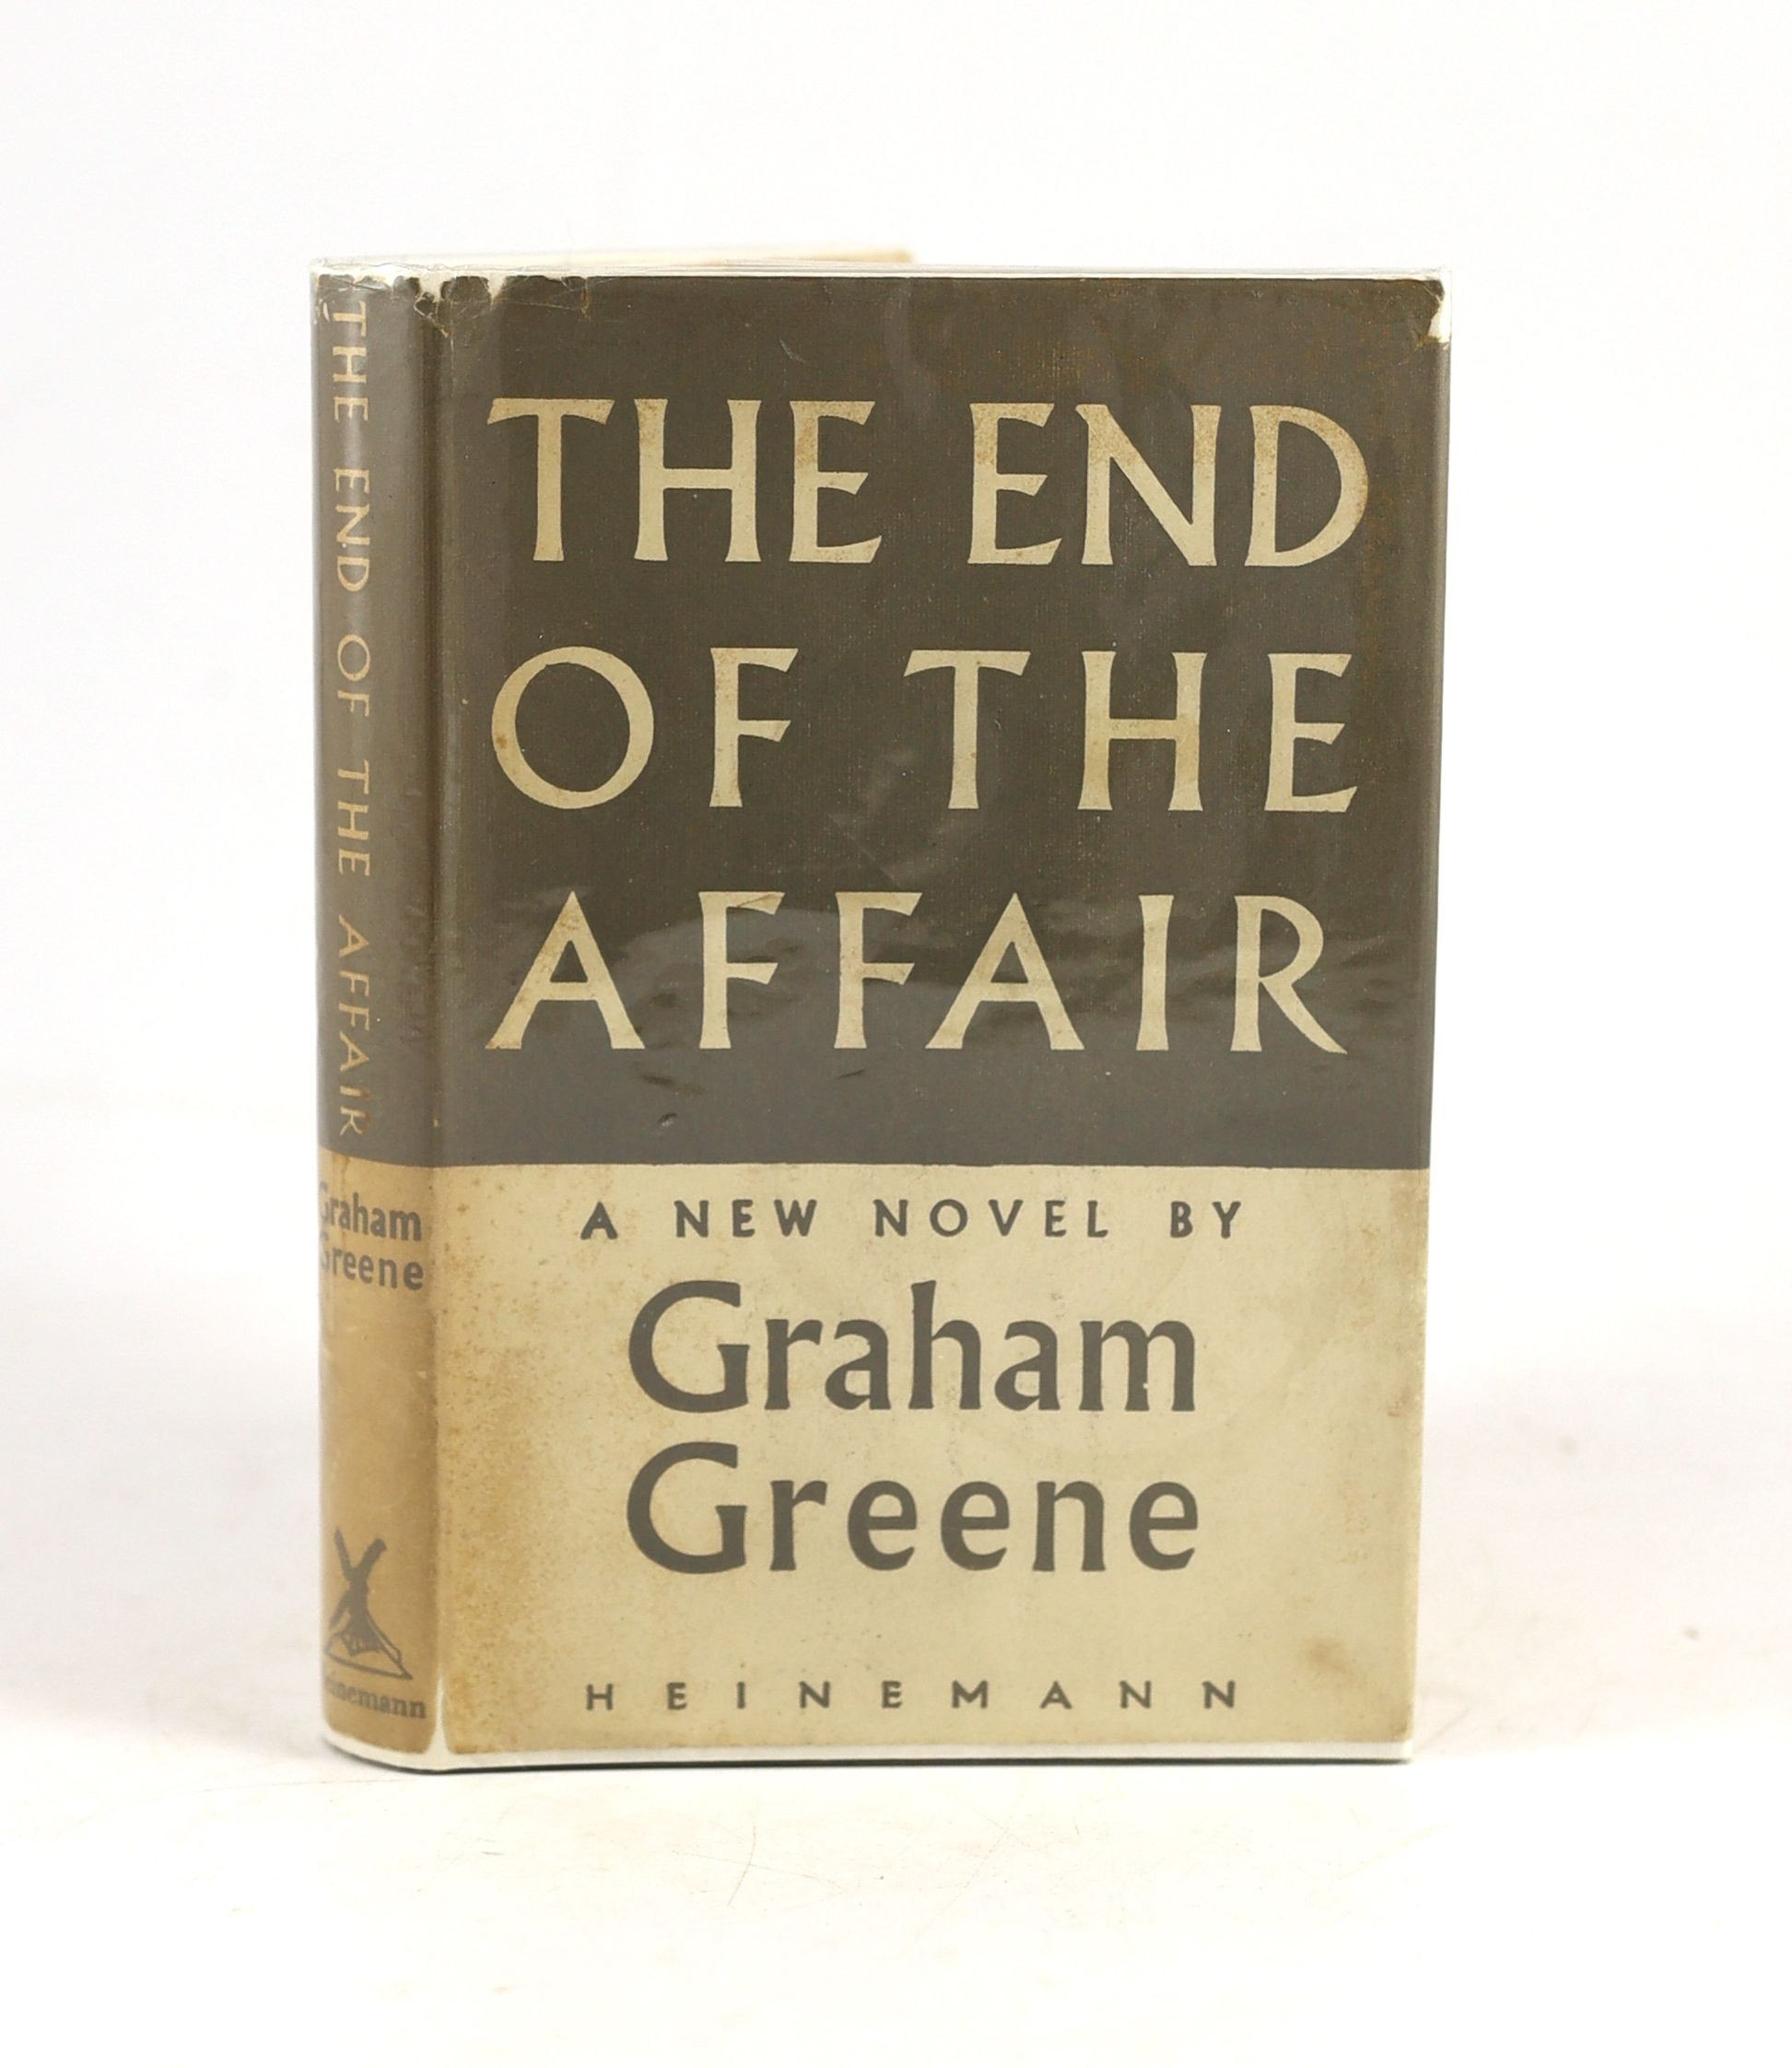 Greene Graham - The End of The Affair. 1st ed. original cloth with unclipped d/j. 8vo. William Heinemann Ltd, London, 1951.